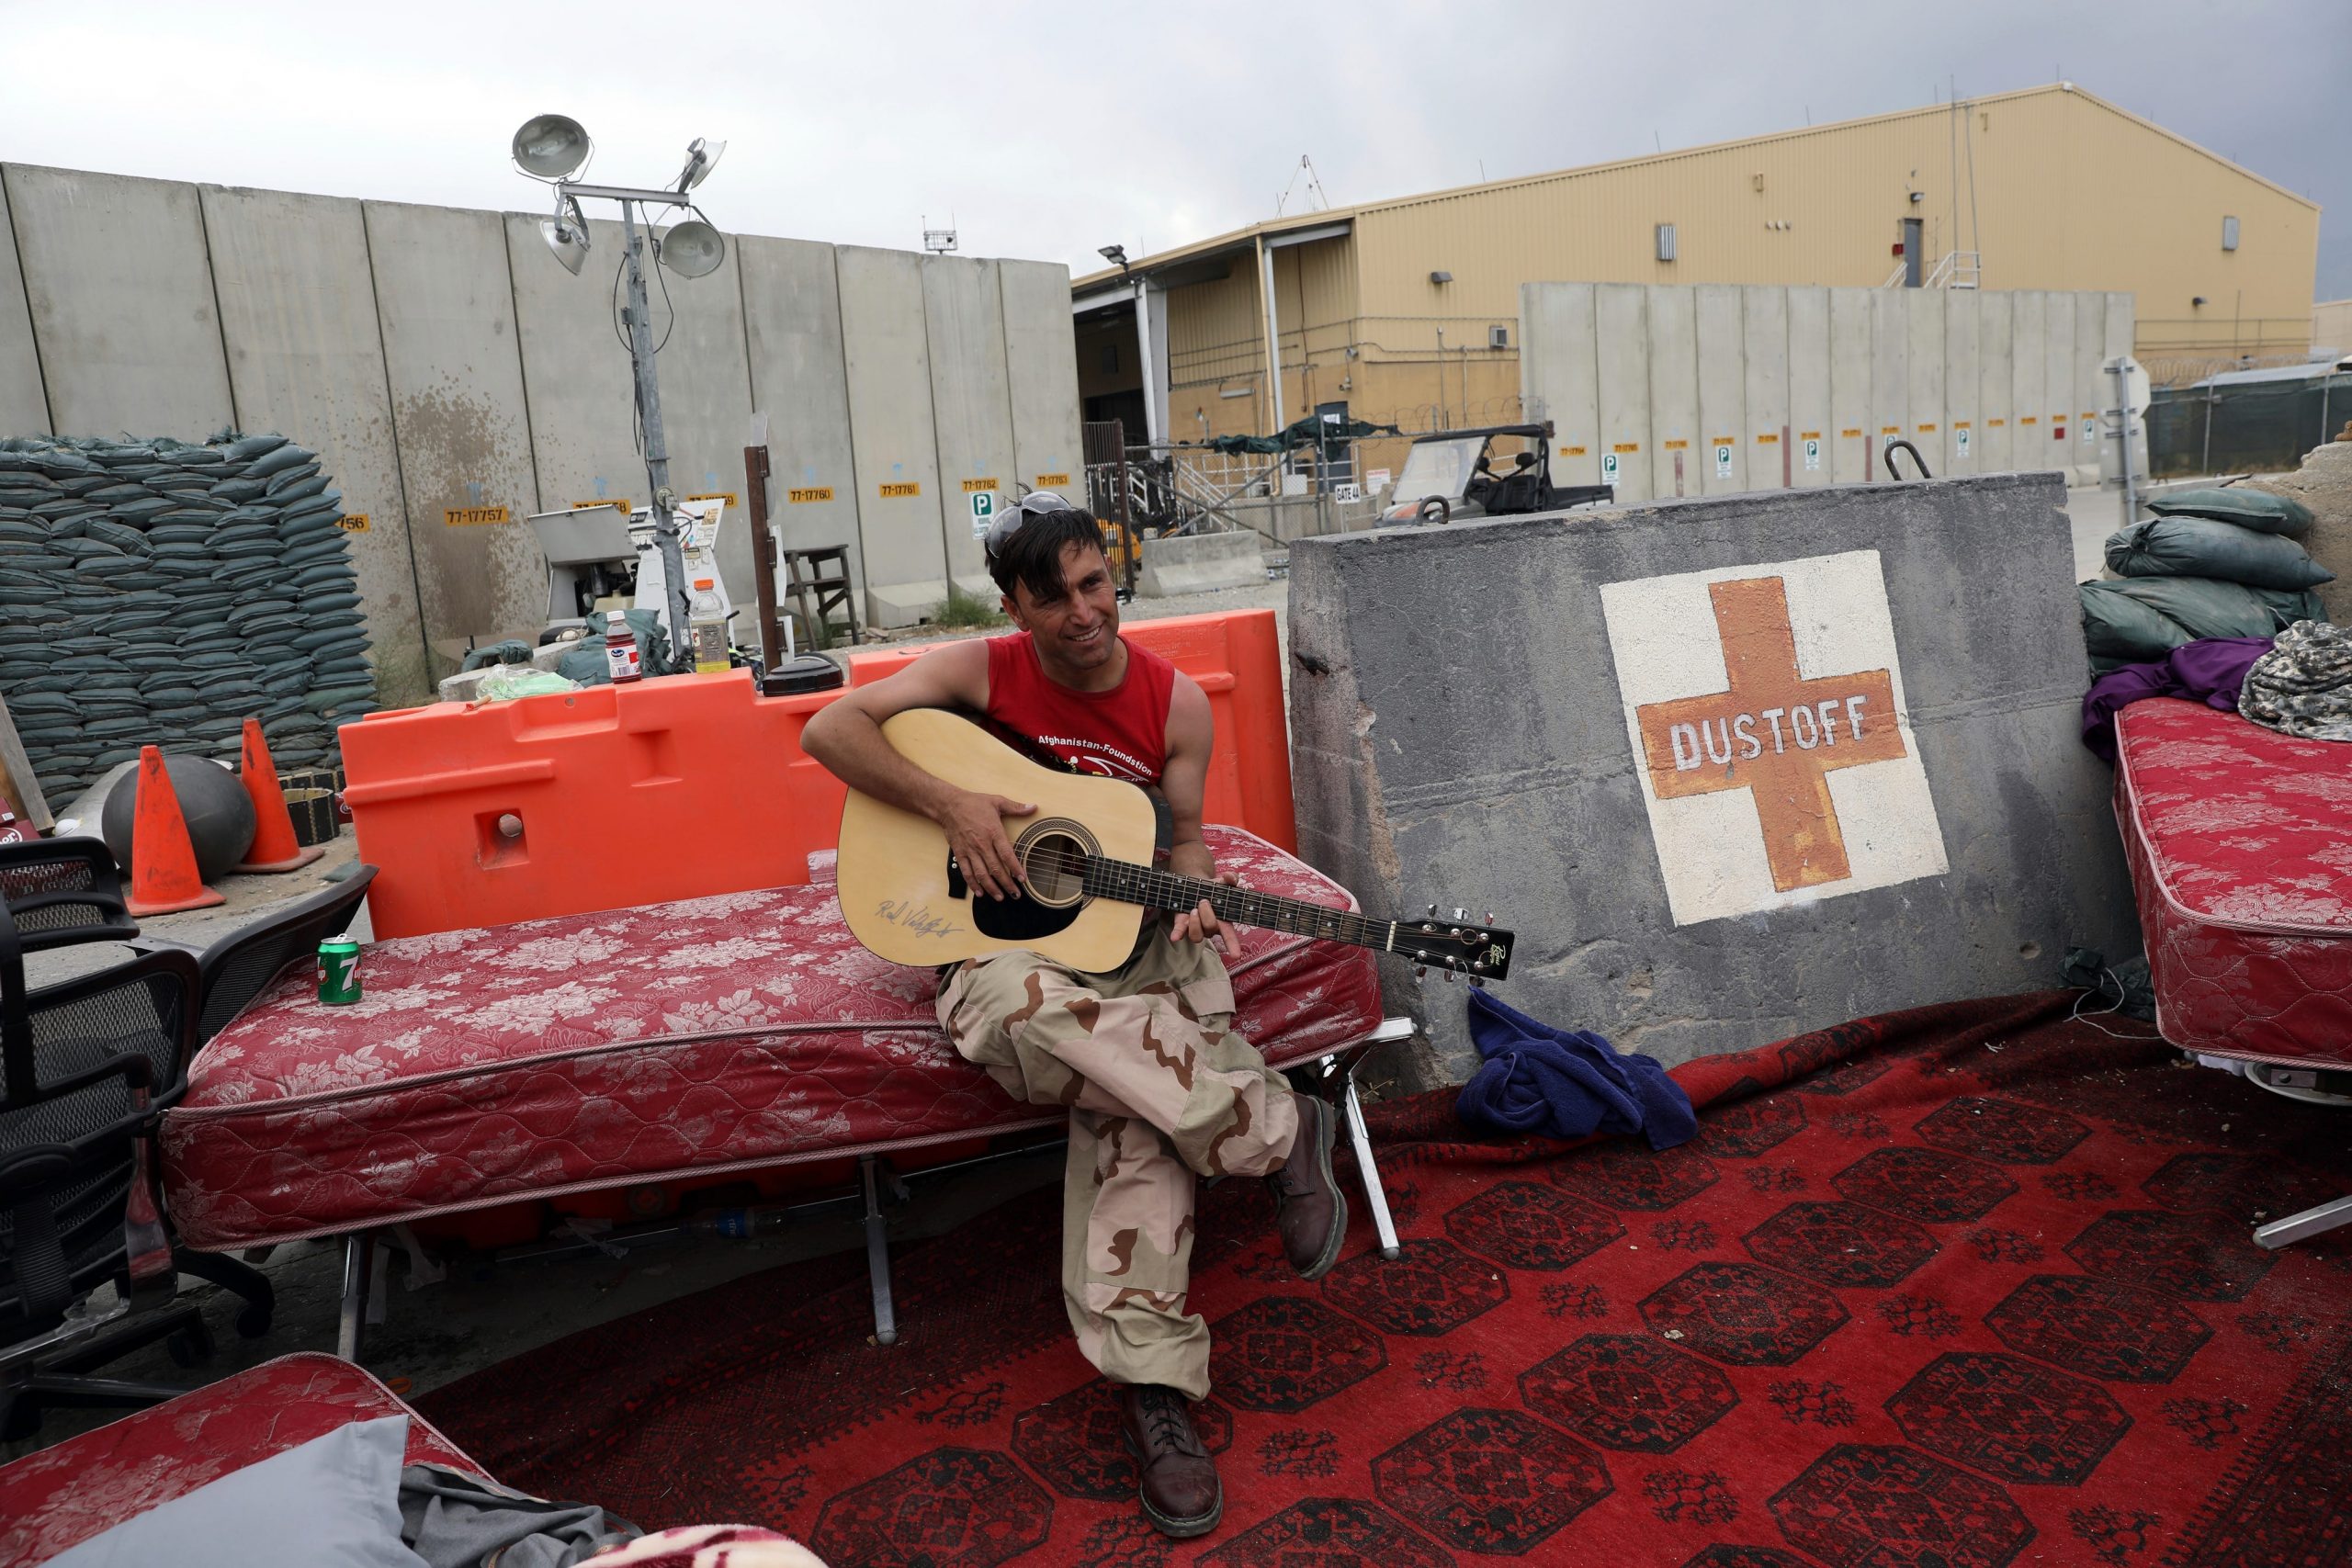 An Afghan soldier plays a guitar that was left behind after the American military departed Bagram